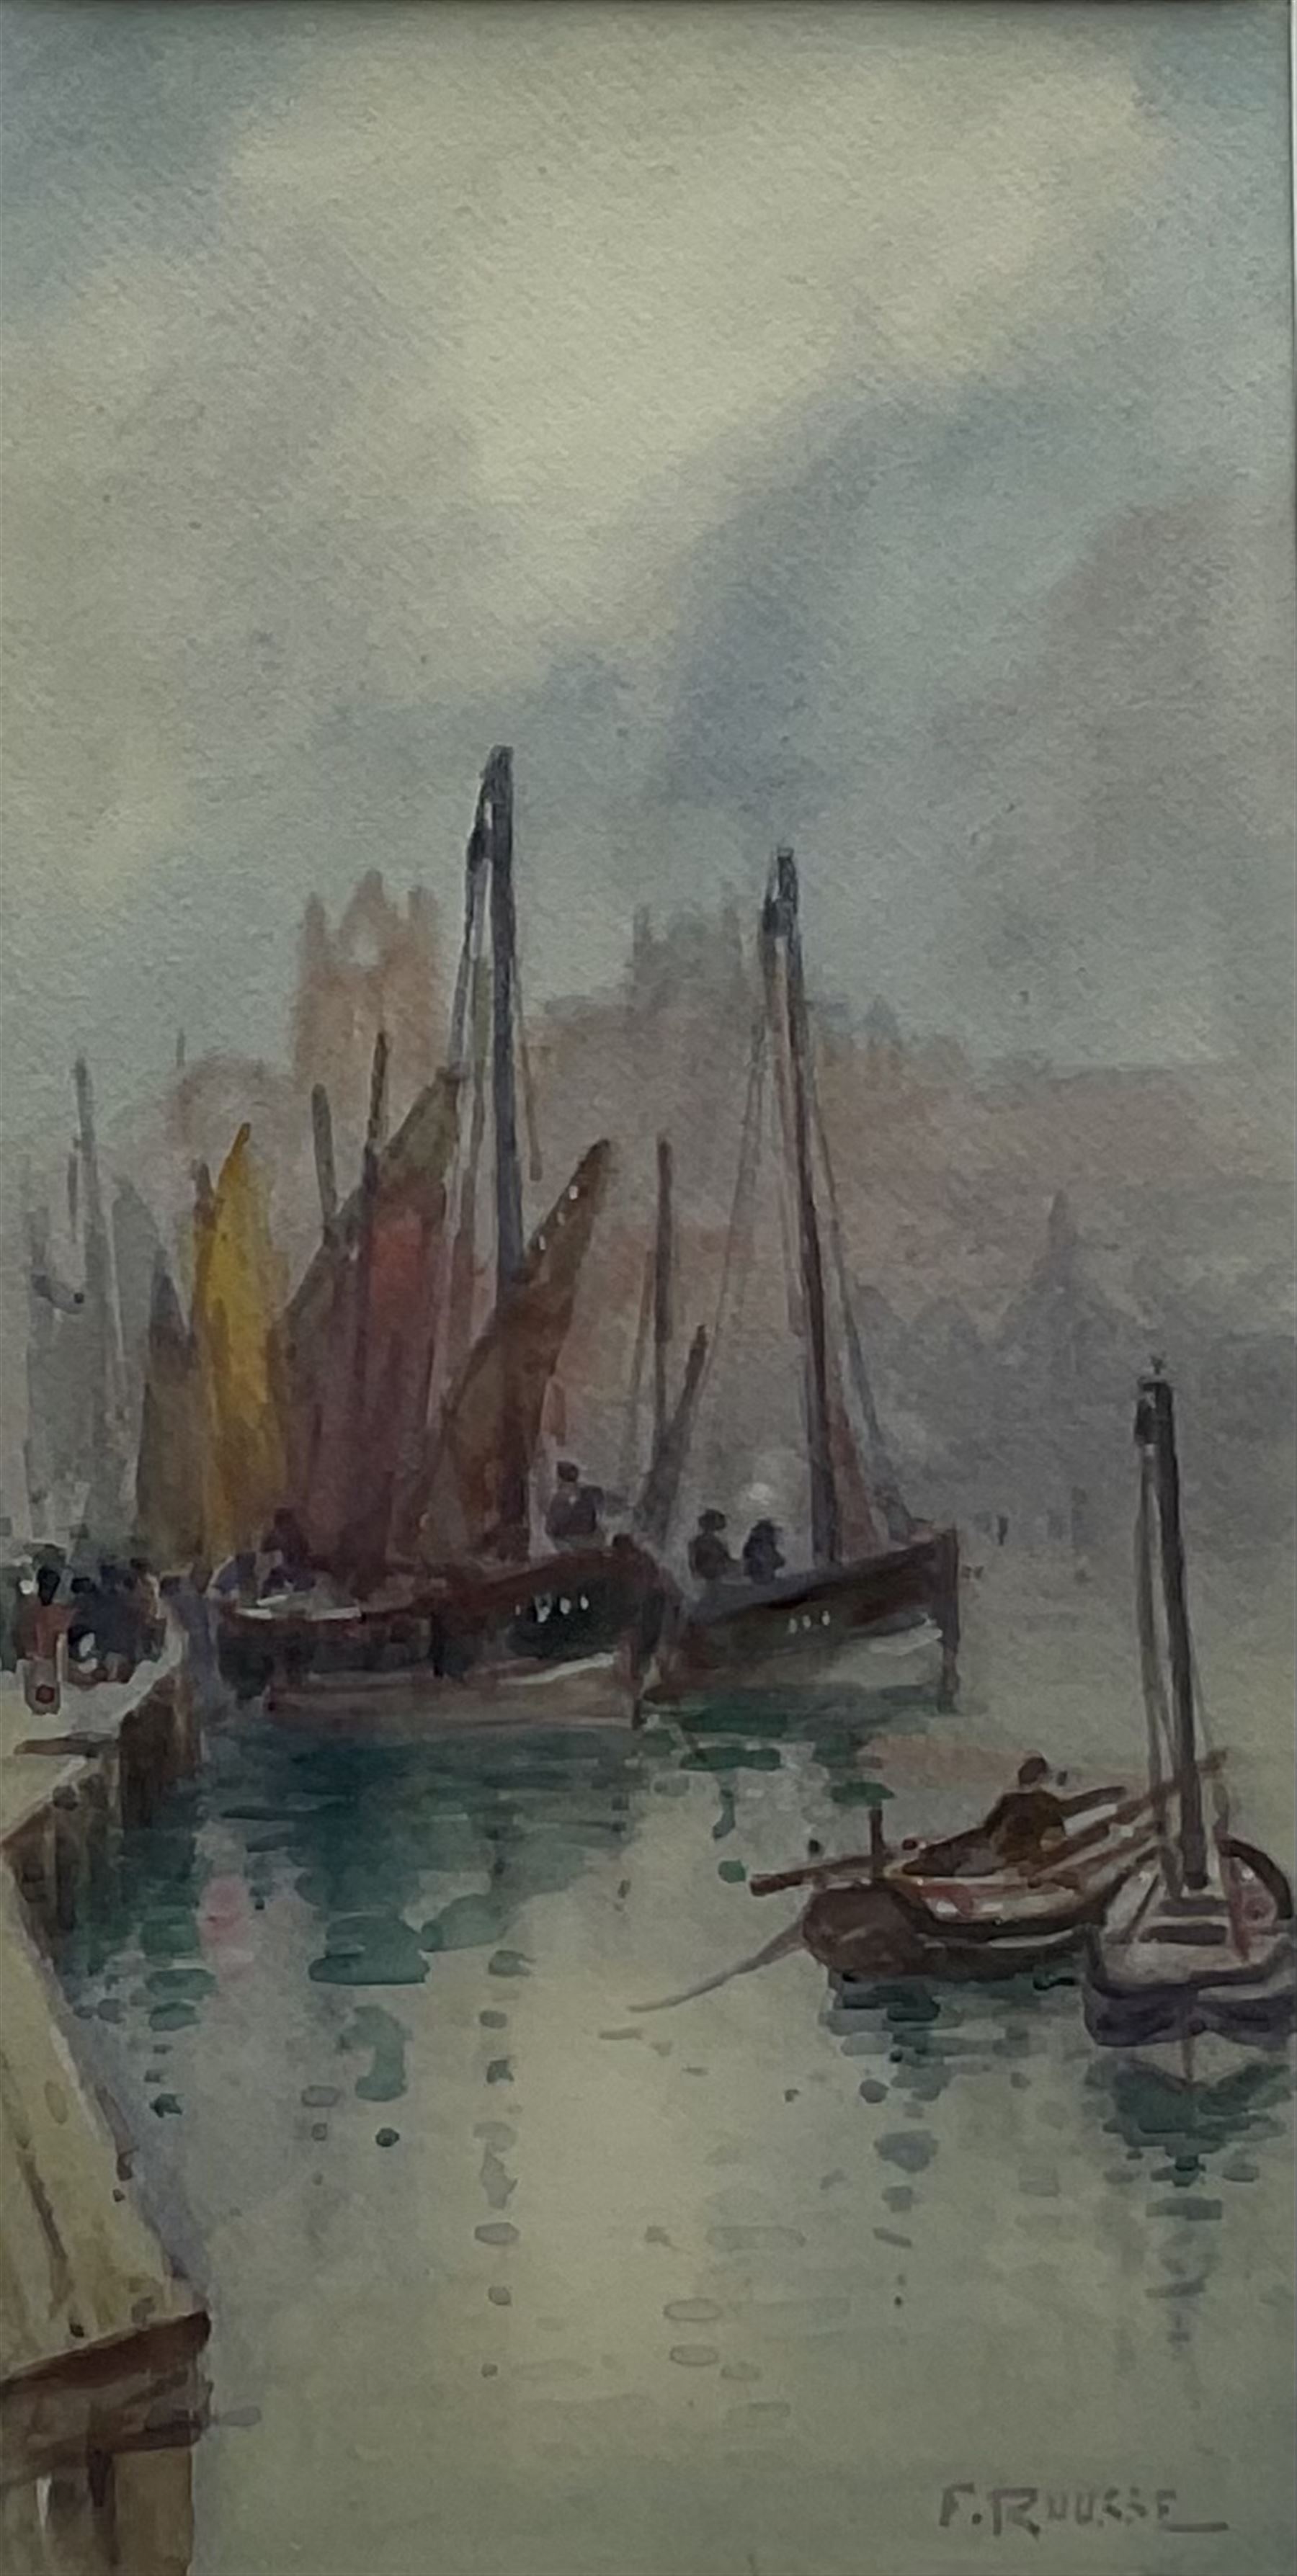 Frank Rousse (British fl.1897-1917): Fishing Boats in Dock End Whitby Harbour